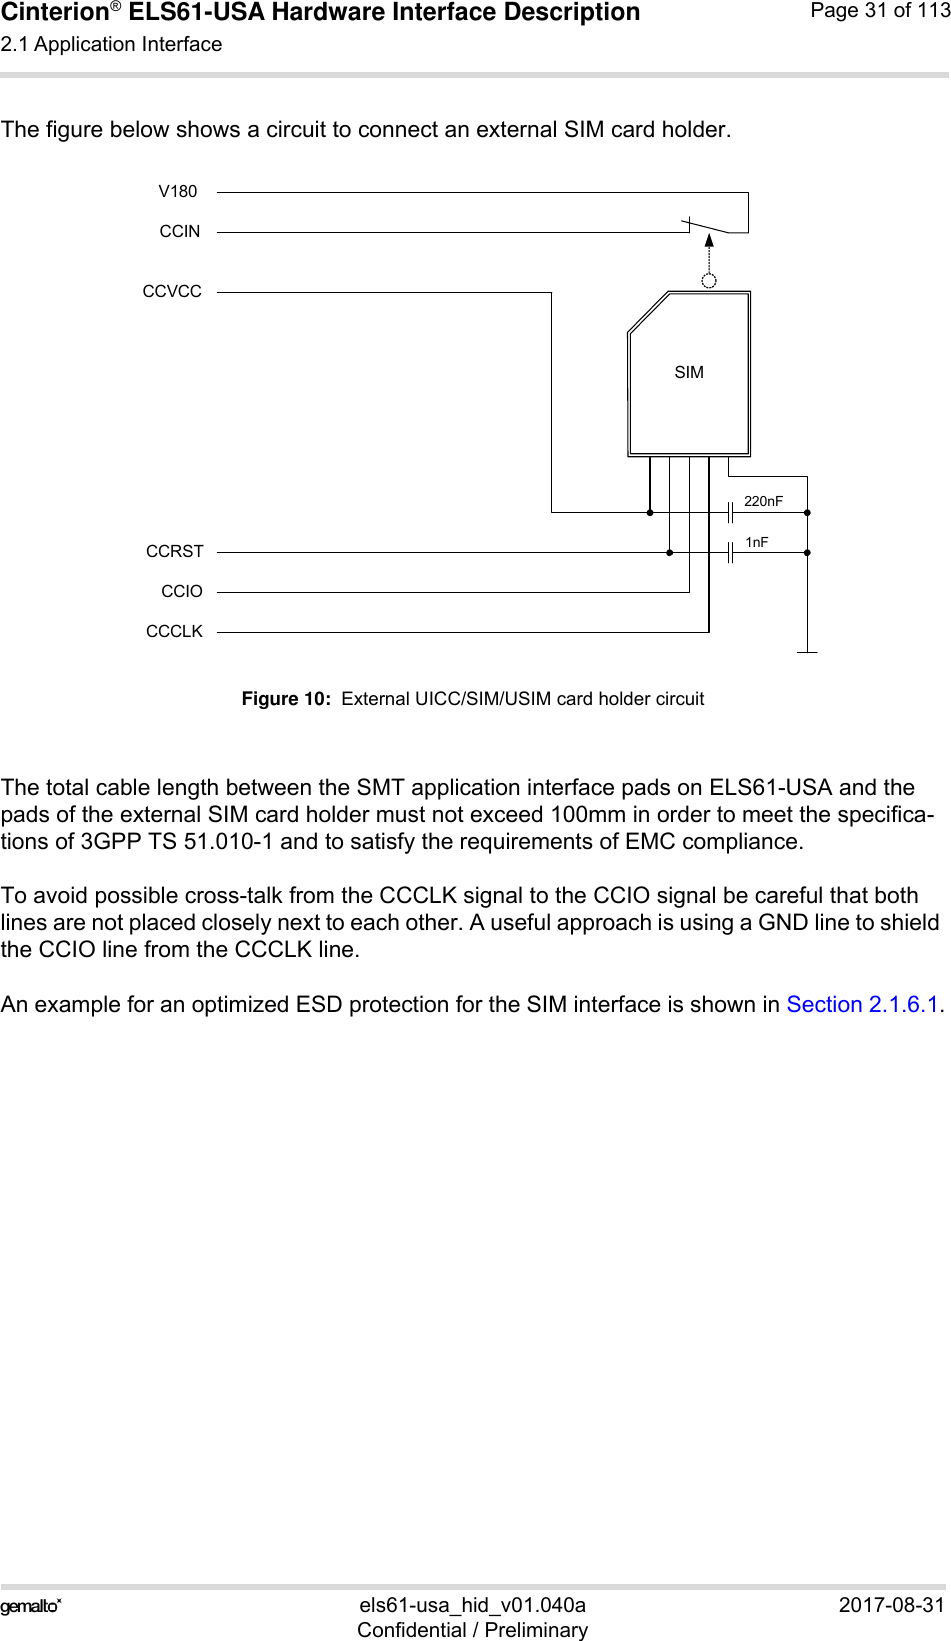 Cinterion® ELS61-USA Hardware Interface Description2.1 Application Interface59els61-usa_hid_v01.040a 2017-08-31Confidential / PreliminaryPage 31 of 113The figure below shows a circuit to connect an external SIM card holder.Figure 10:  External UICC/SIM/USIM card holder circuitThe total cable length between the SMT application interface pads on ELS61-USA and the pads of the external SIM card holder must not exceed 100mm in order to meet the specifica-tions of 3GPP TS 51.010-1 and to satisfy the requirements of EMC compliance.To avoid possible cross-talk from the CCCLK signal to the CCIO signal be careful that both lines are not placed closely next to each other. A useful approach is using a GND line to shield the CCIO line from the CCCLK line.An example for an optimized ESD protection for the SIM interface is shown in Section 2.1.6.1.SIMCCVCCCCRSTCCIOCCCLK220nF1nFCCINV180